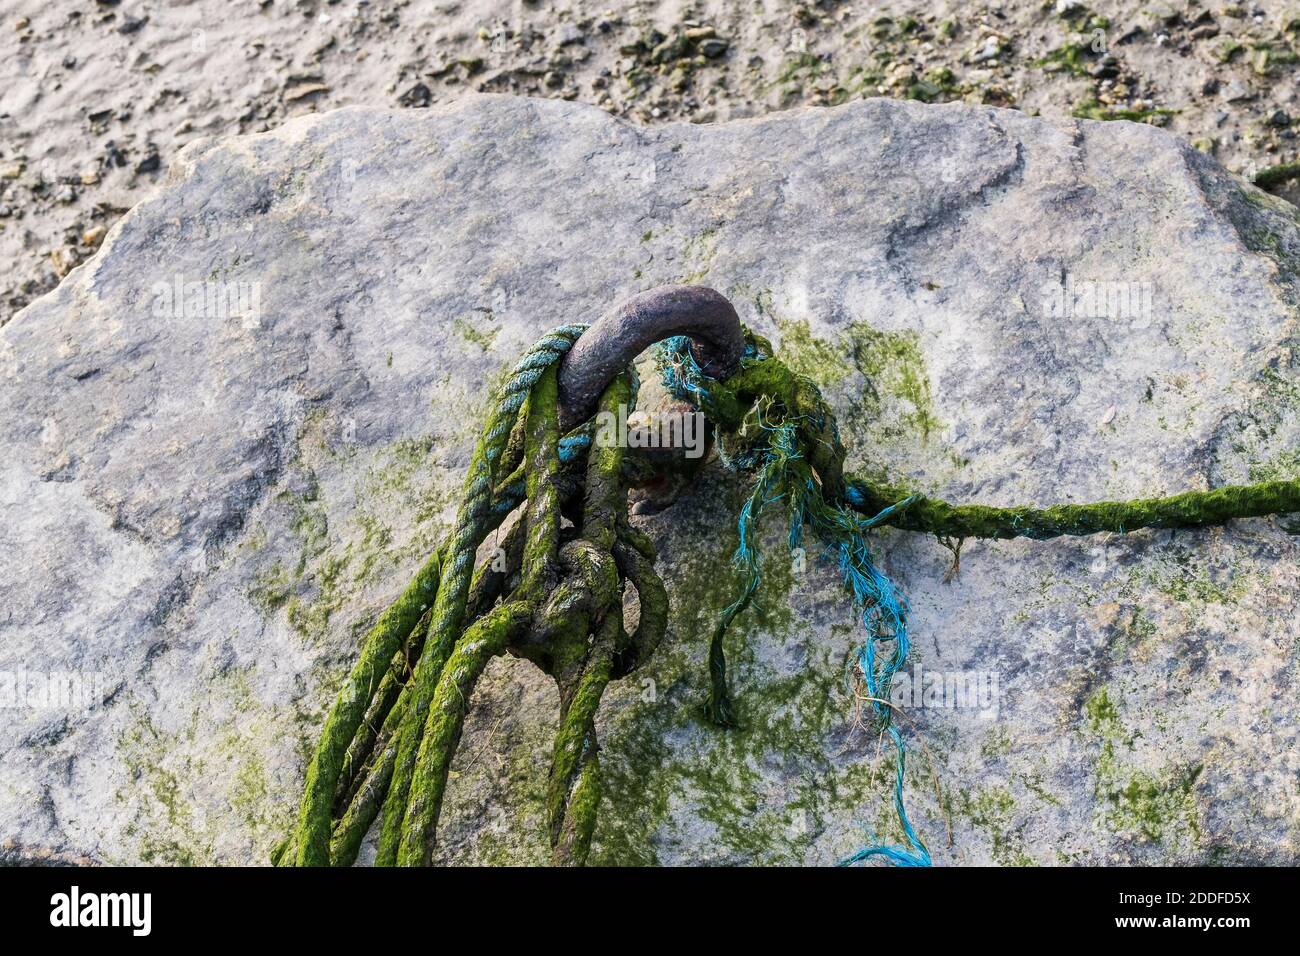 Algae covered rope looped through a rusty metal eyelet attached to a large rock. Stock Photo